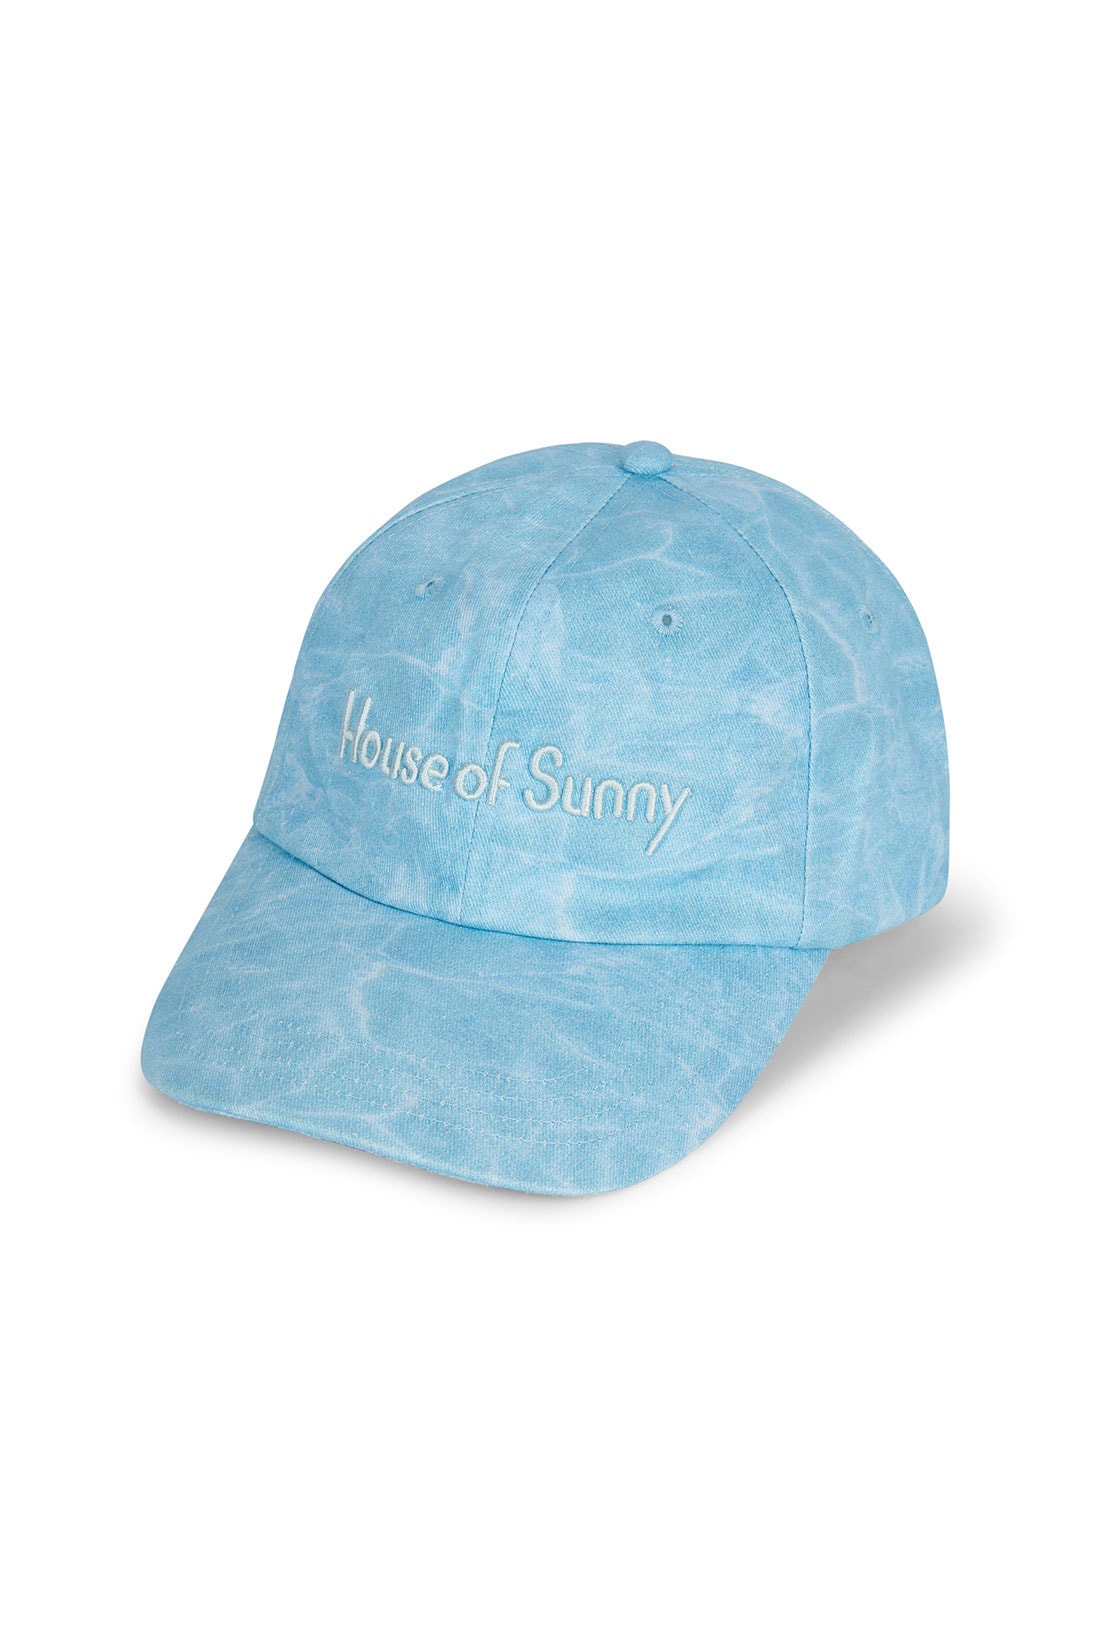 house of sunny spring summer ss21 pure shore collection cap hat